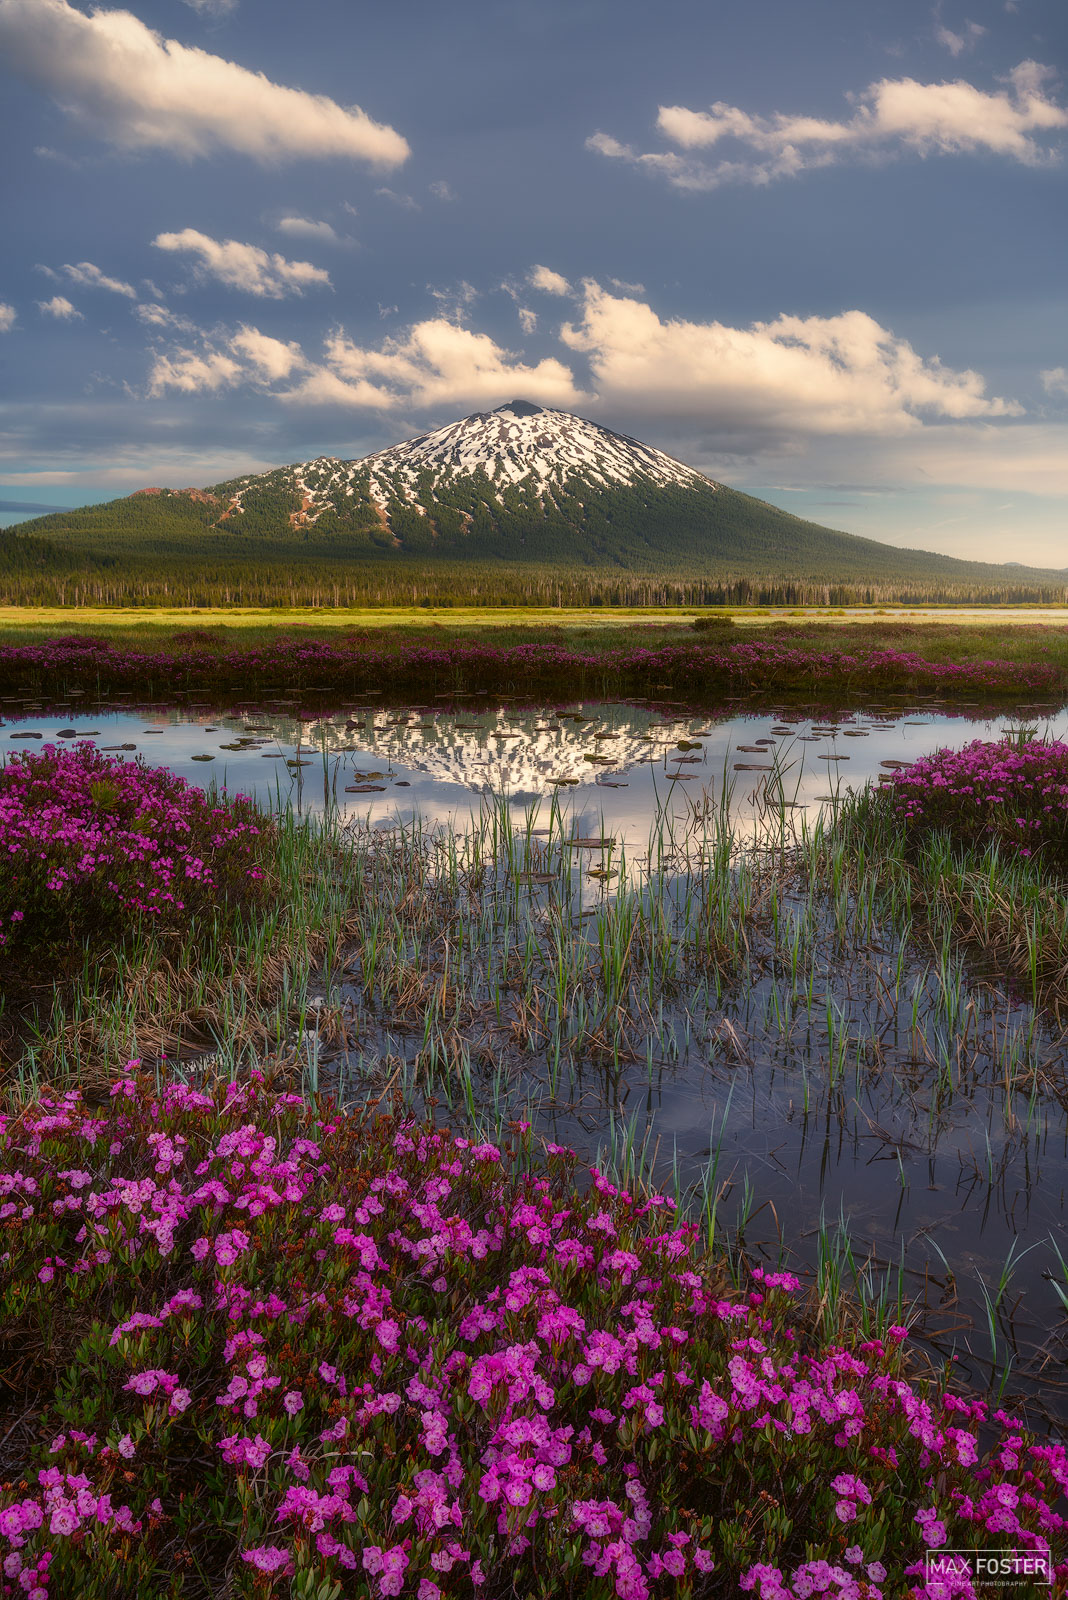 Bring your walls to life with Sleeping Giant, Max Foster's limited edition photography print of wildflower meadows at Mount Bachelor...